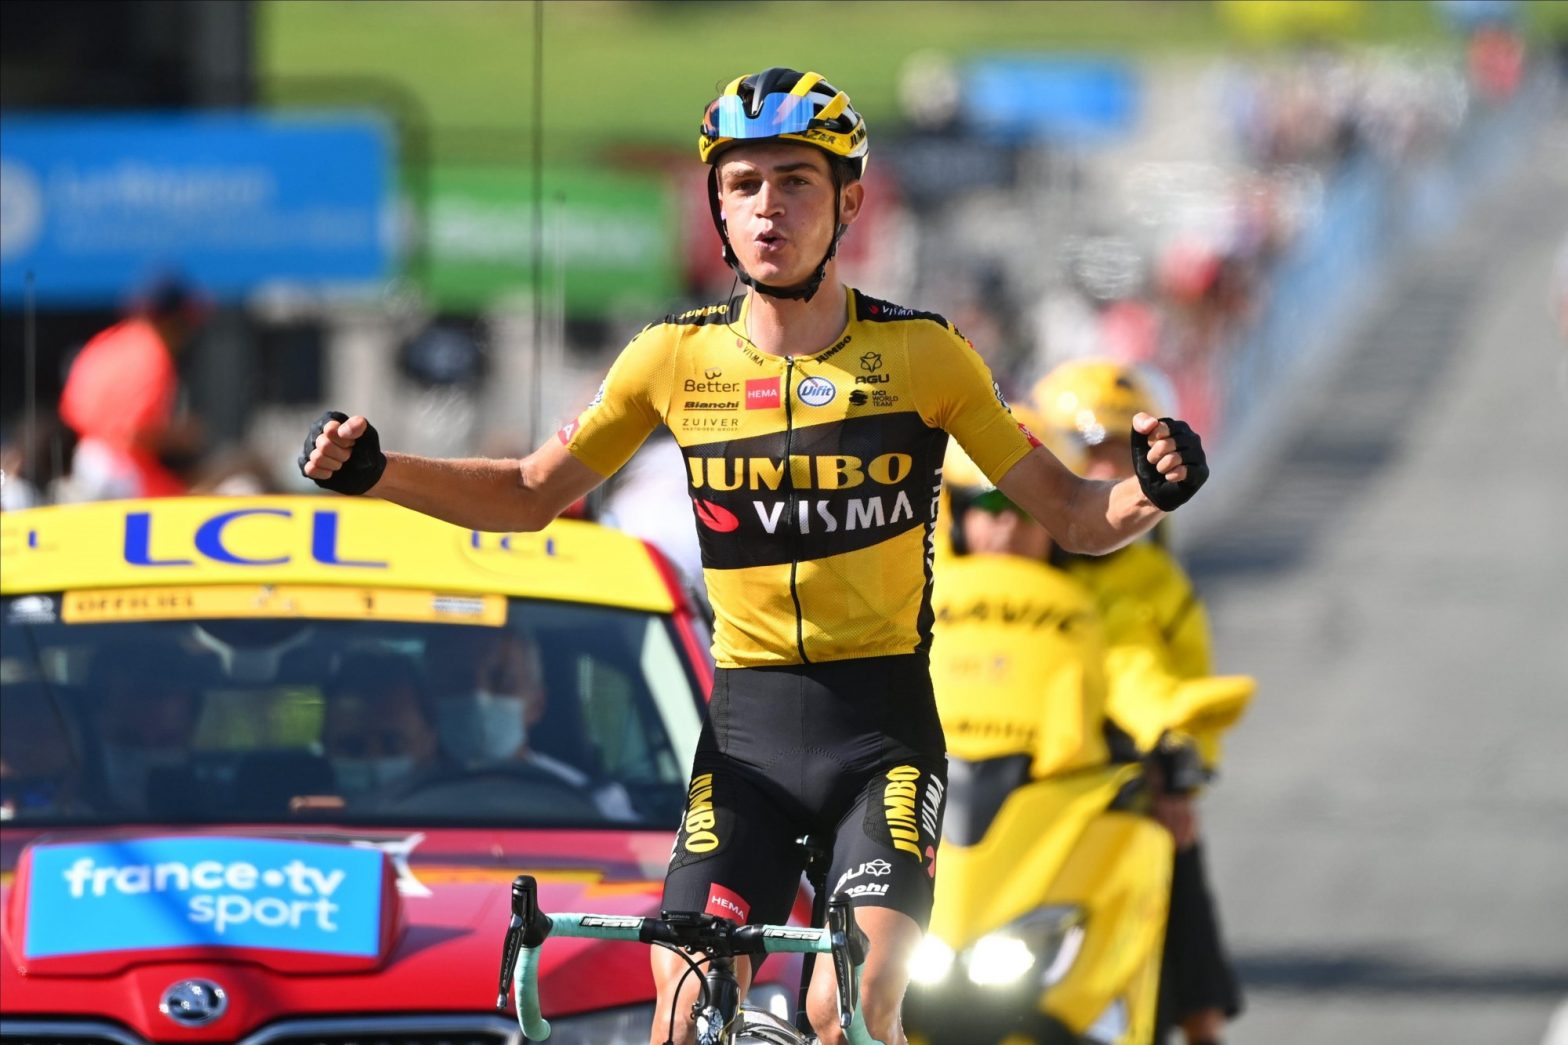 Who is the US cyclist, Sepp Kuss, in Tour de France? All about the cyclist’s crash in Stage 15